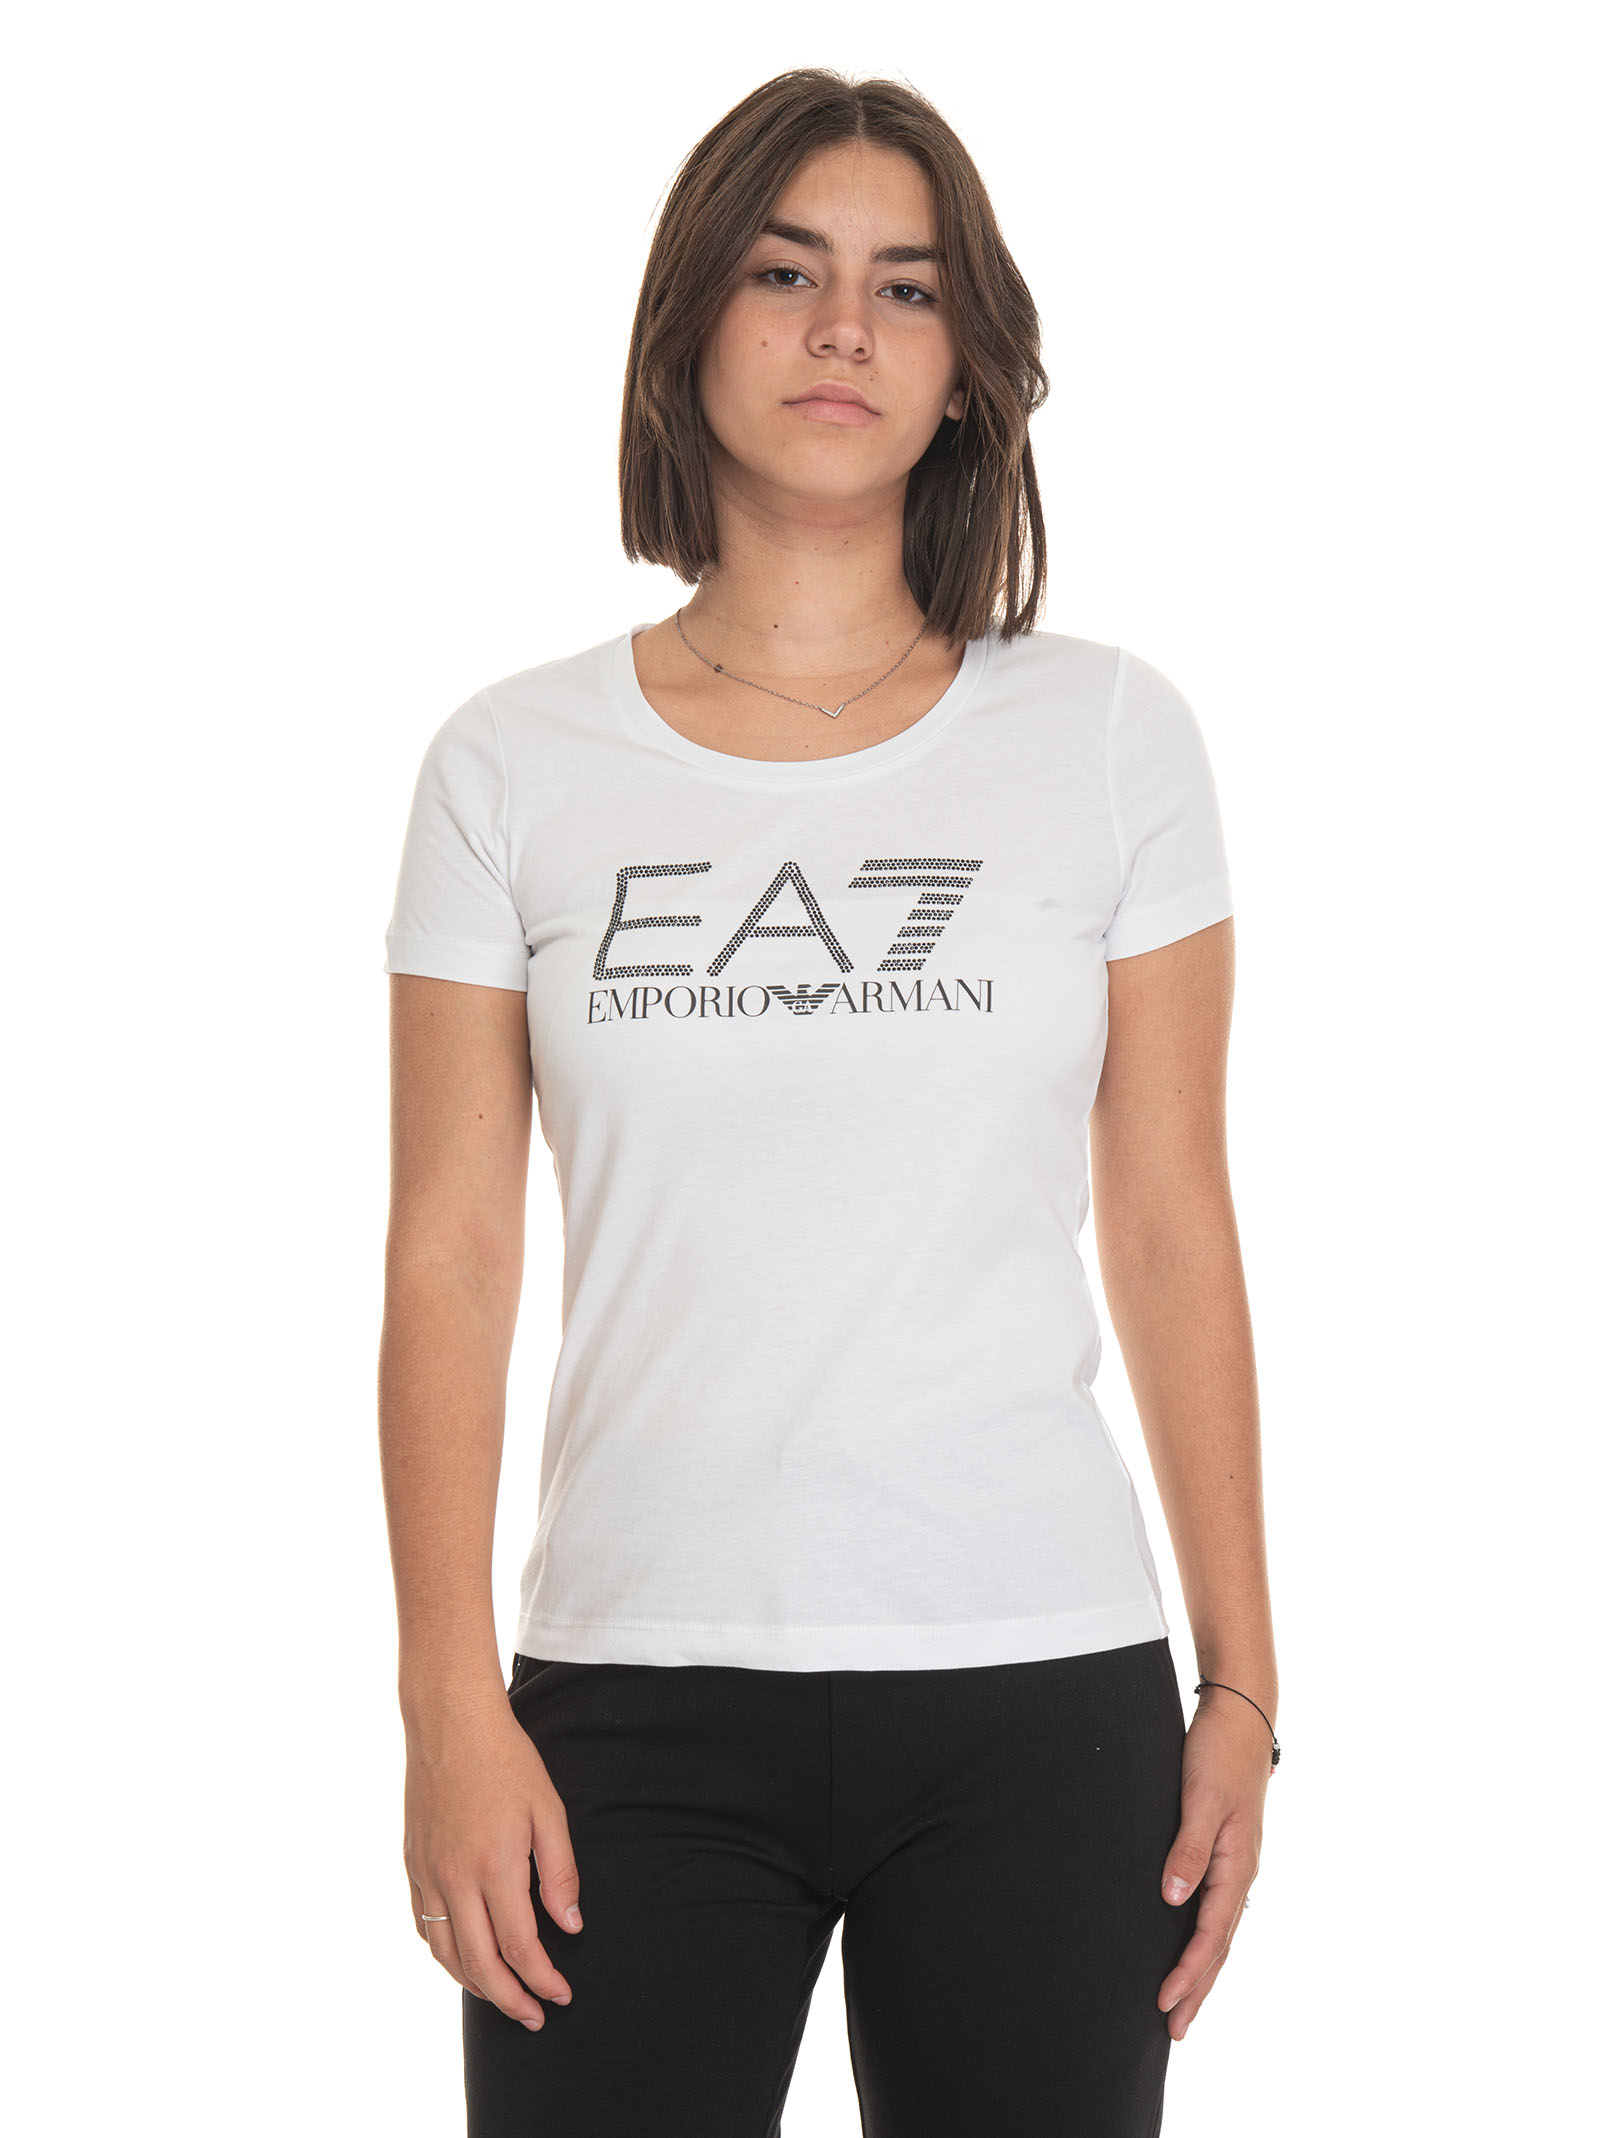 Ea7 T-shirt In White